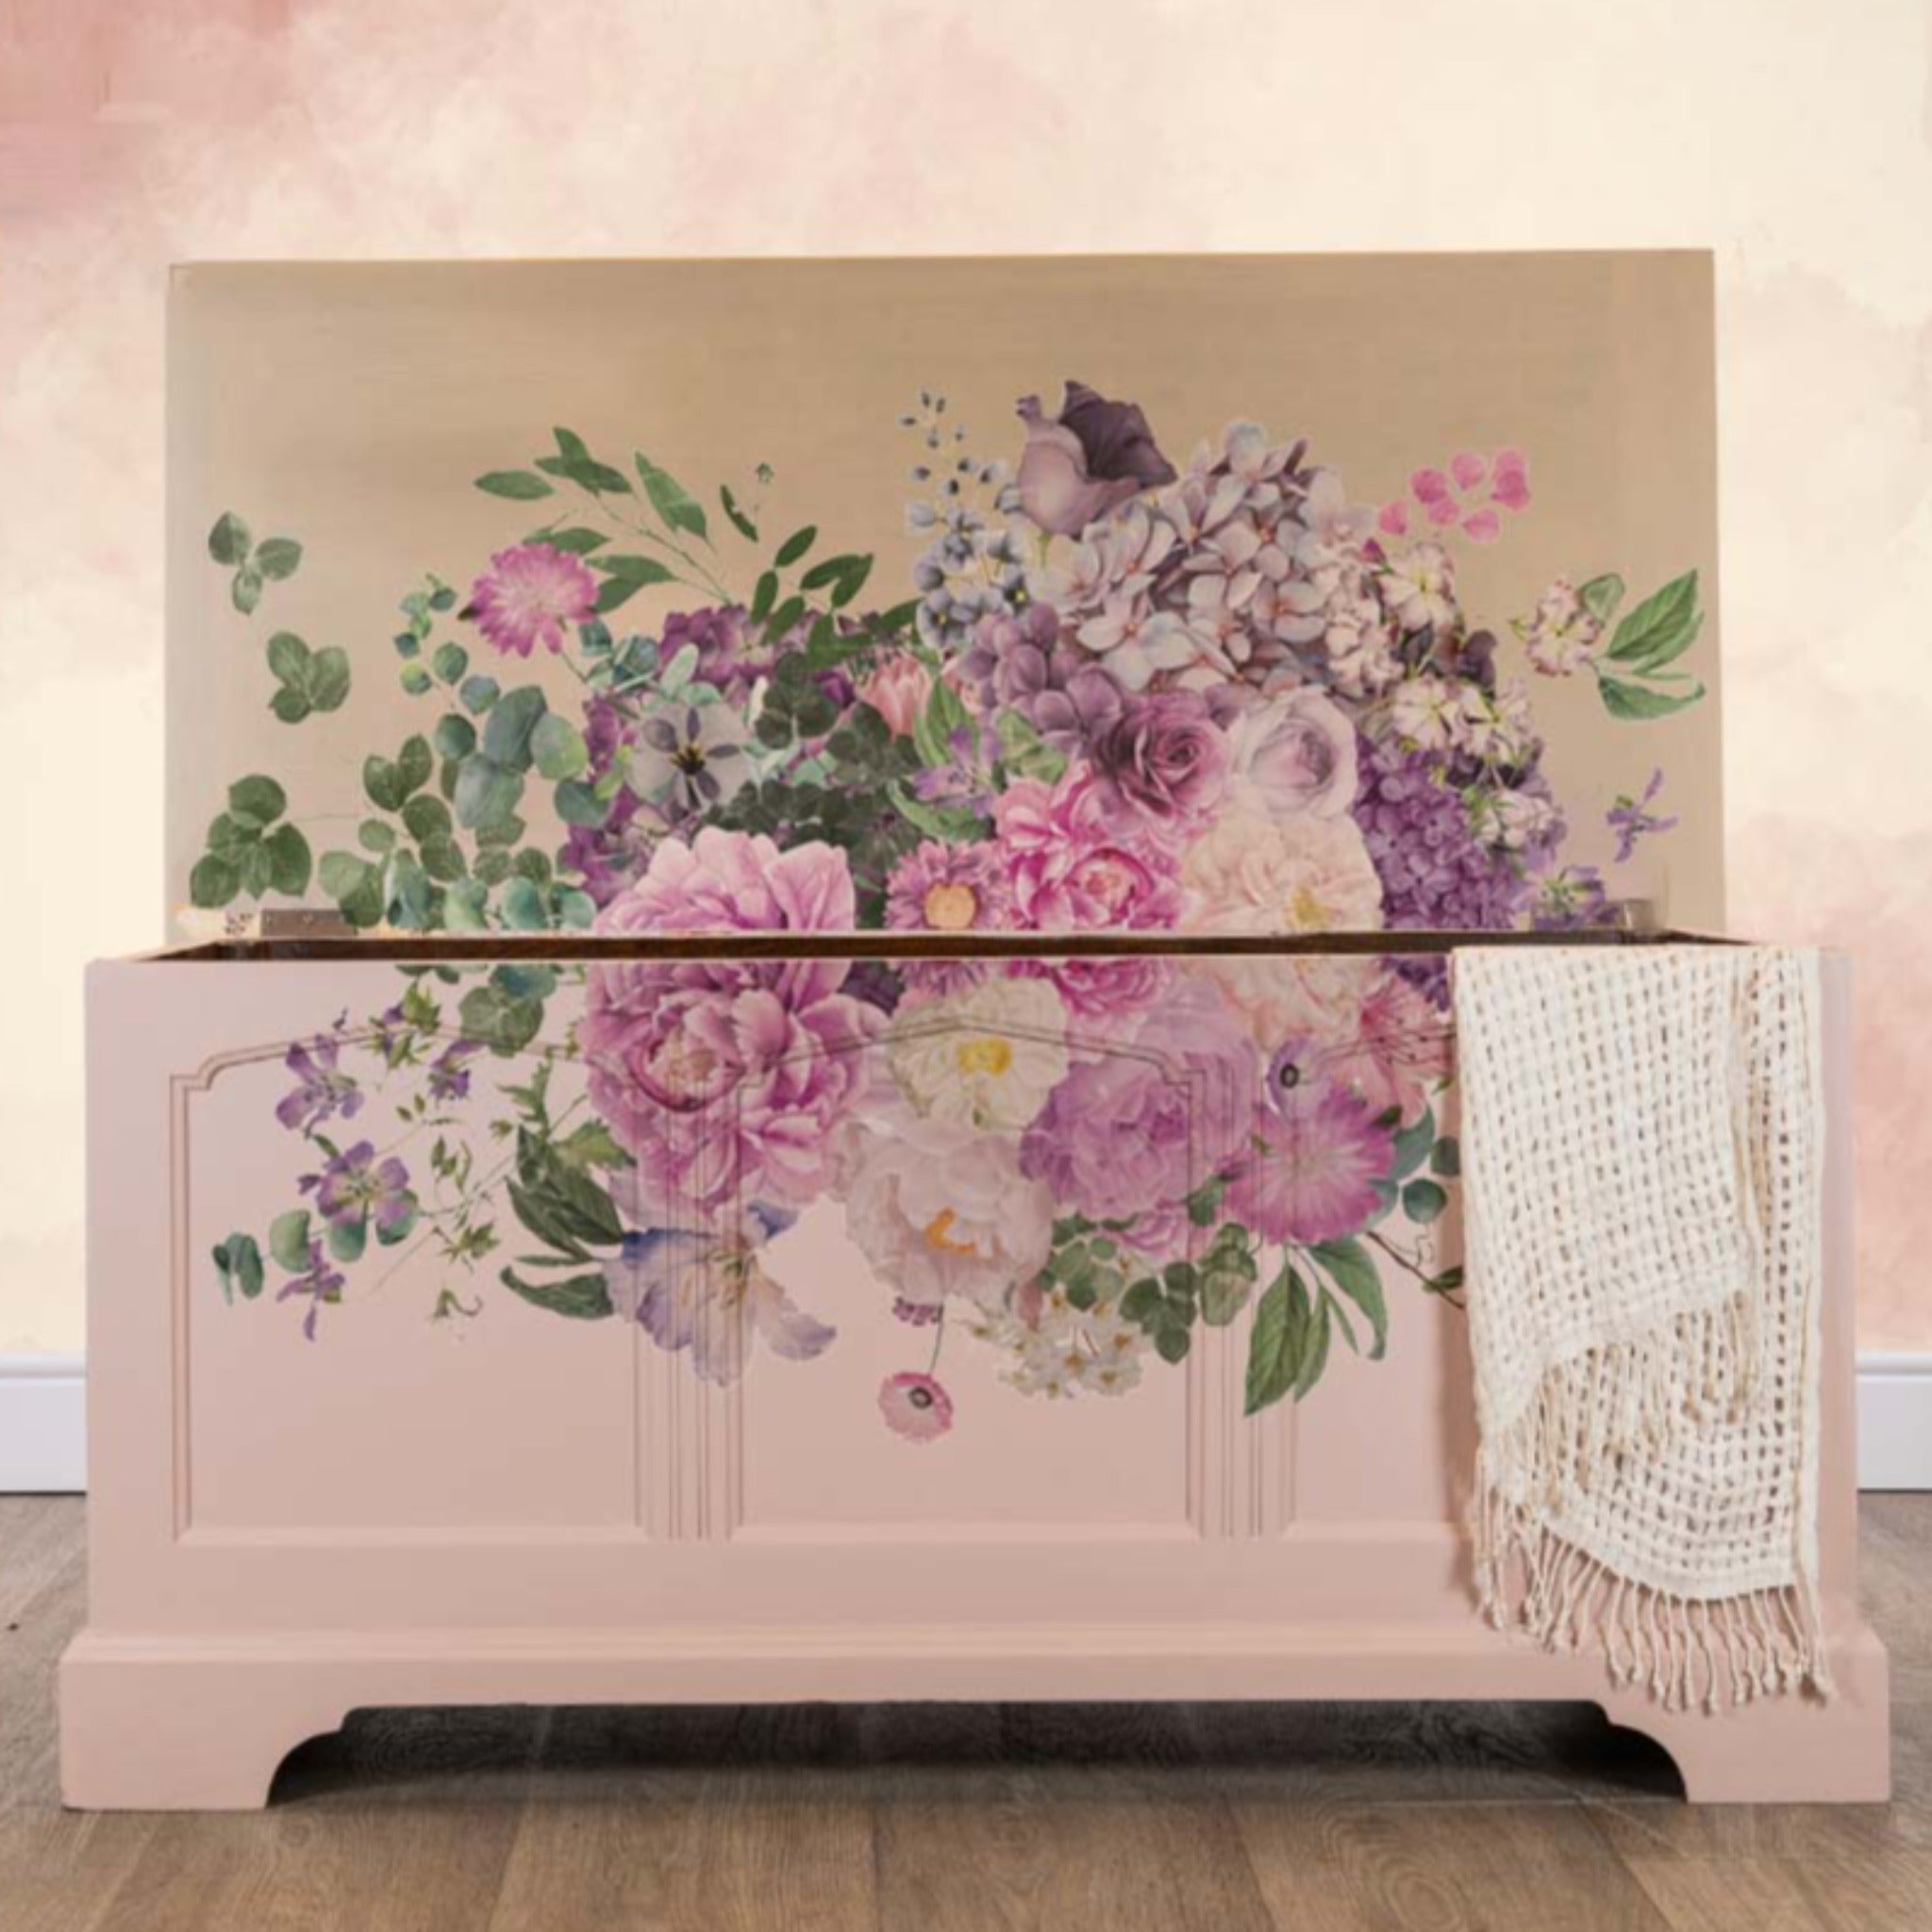 A wood storage chest with the lid open is painted light tan and features ReDesign with Prima's Kacha Morning Purple transfer on the front and inside the lid. When the lid is open it creates a full image of the transfer.